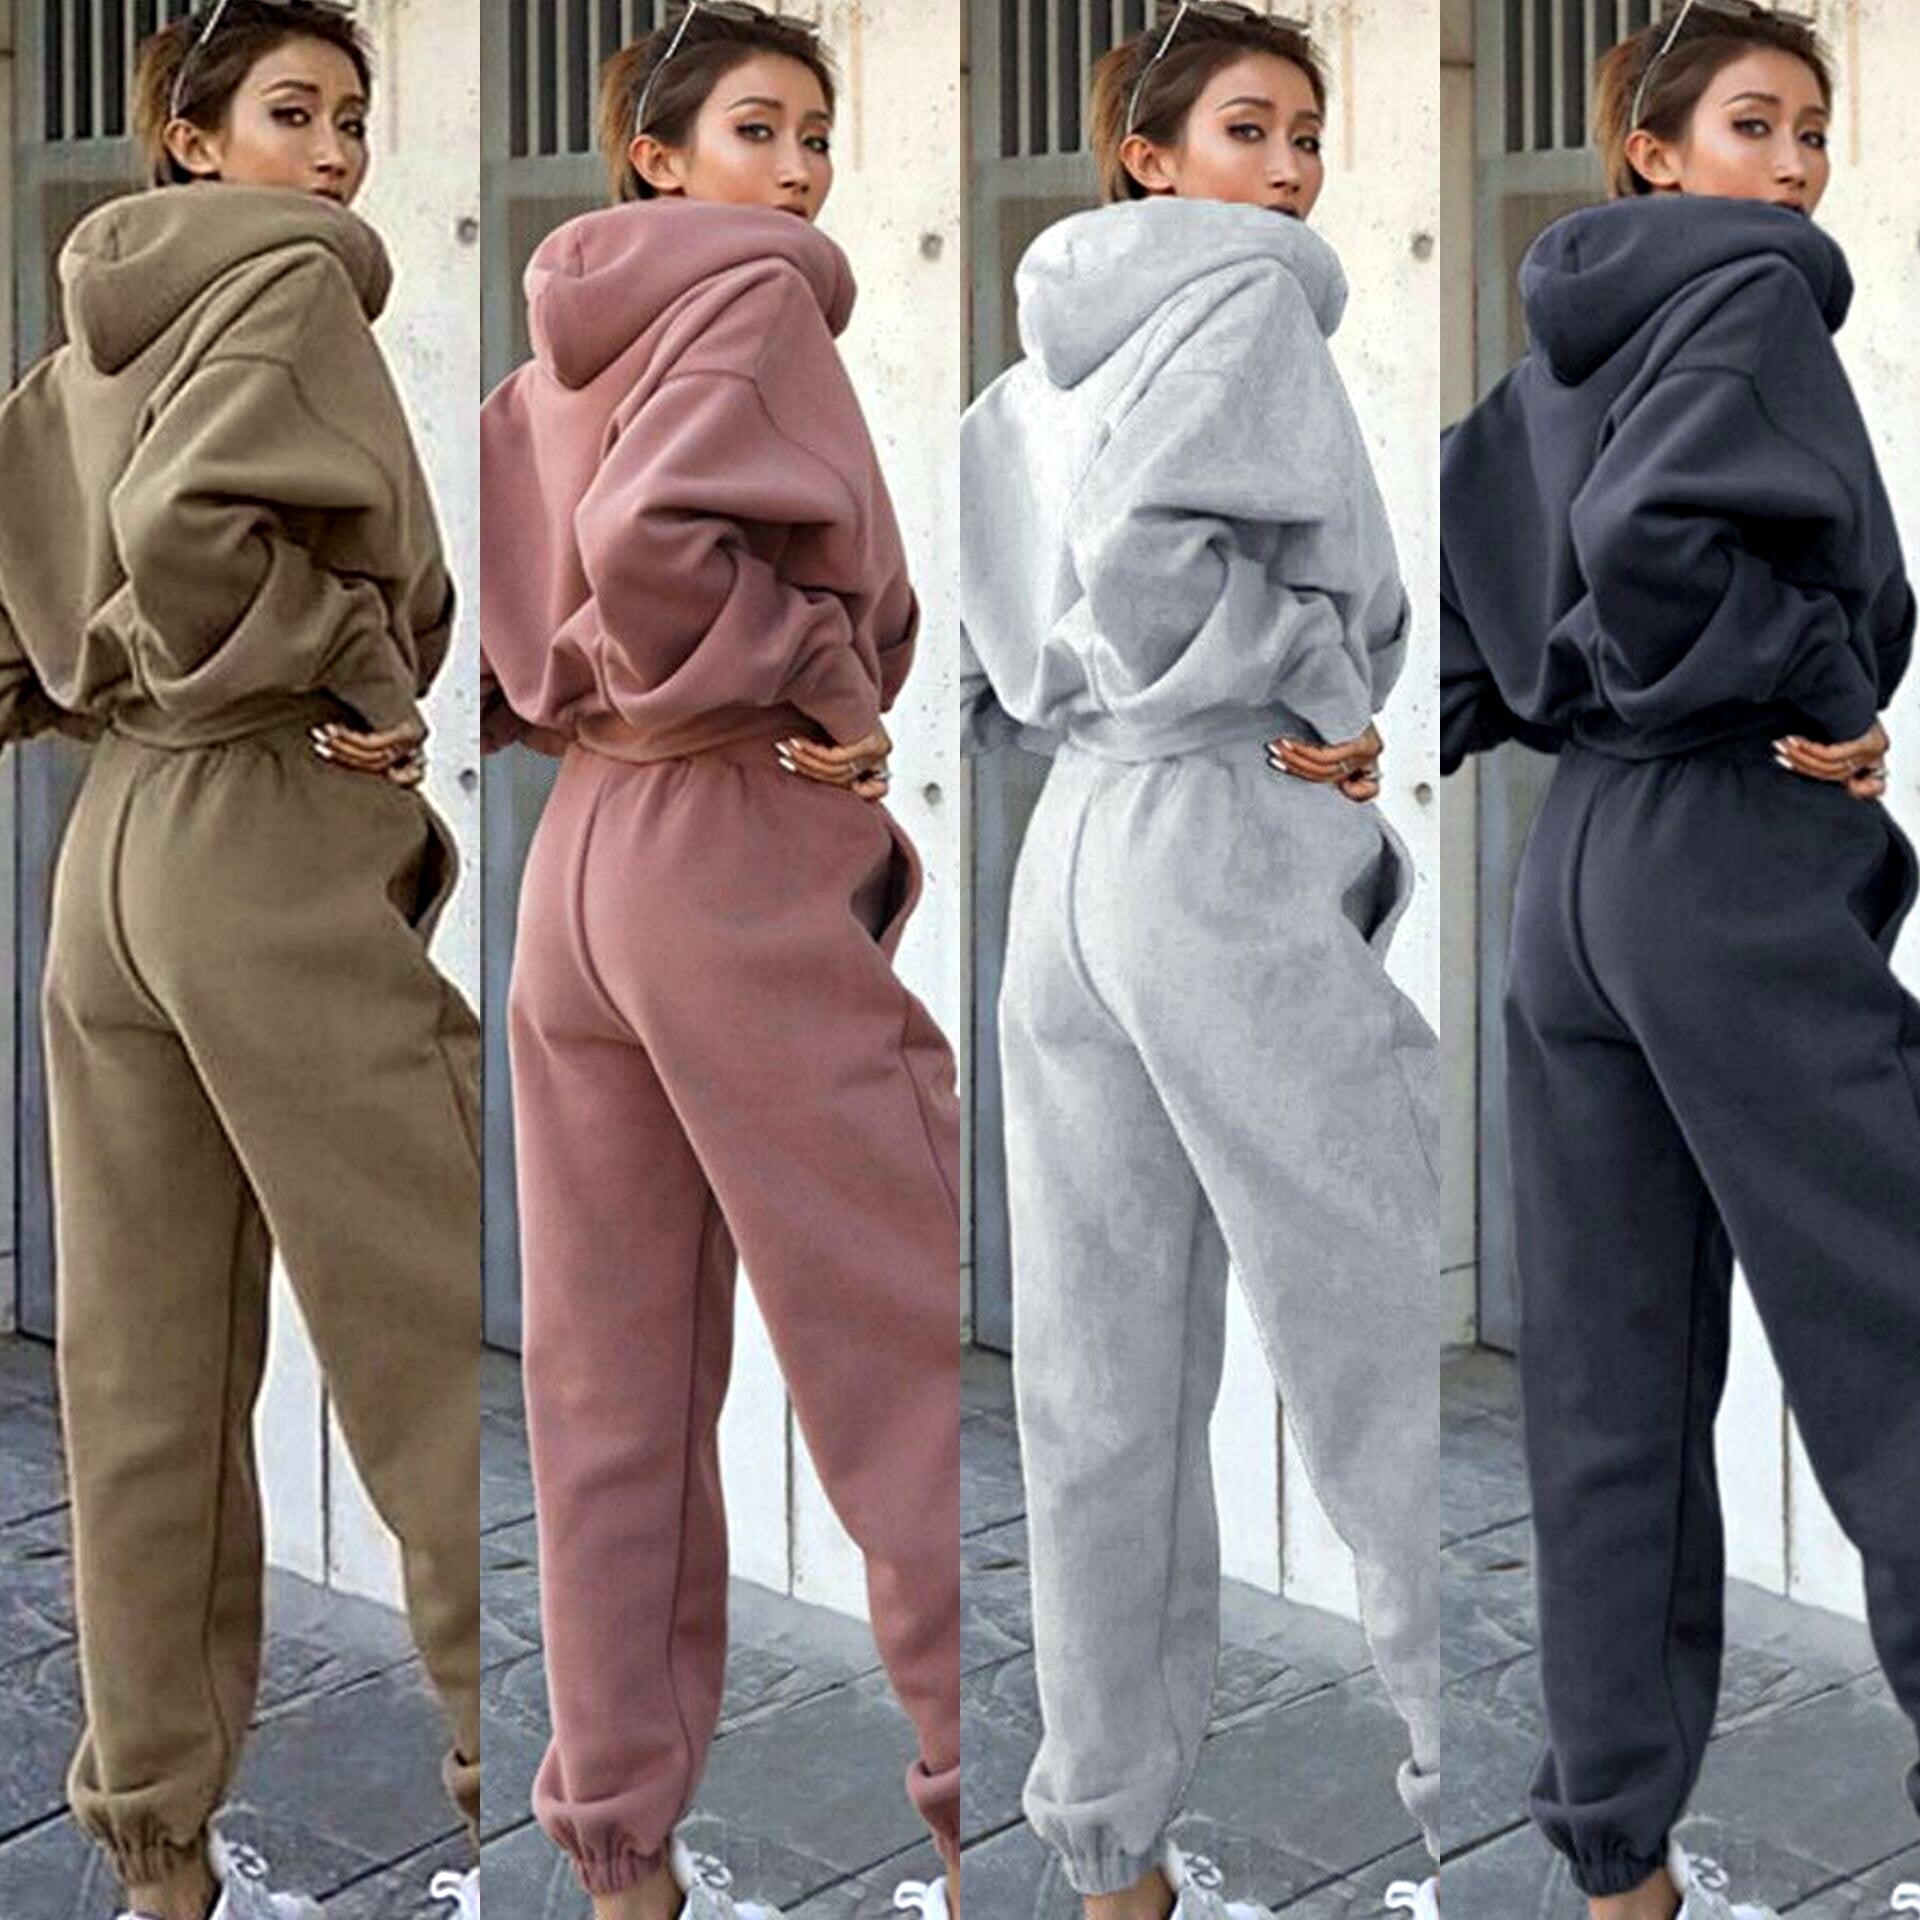 Women's Casual Hoodie Sports Suit - Everyday-Sales.com